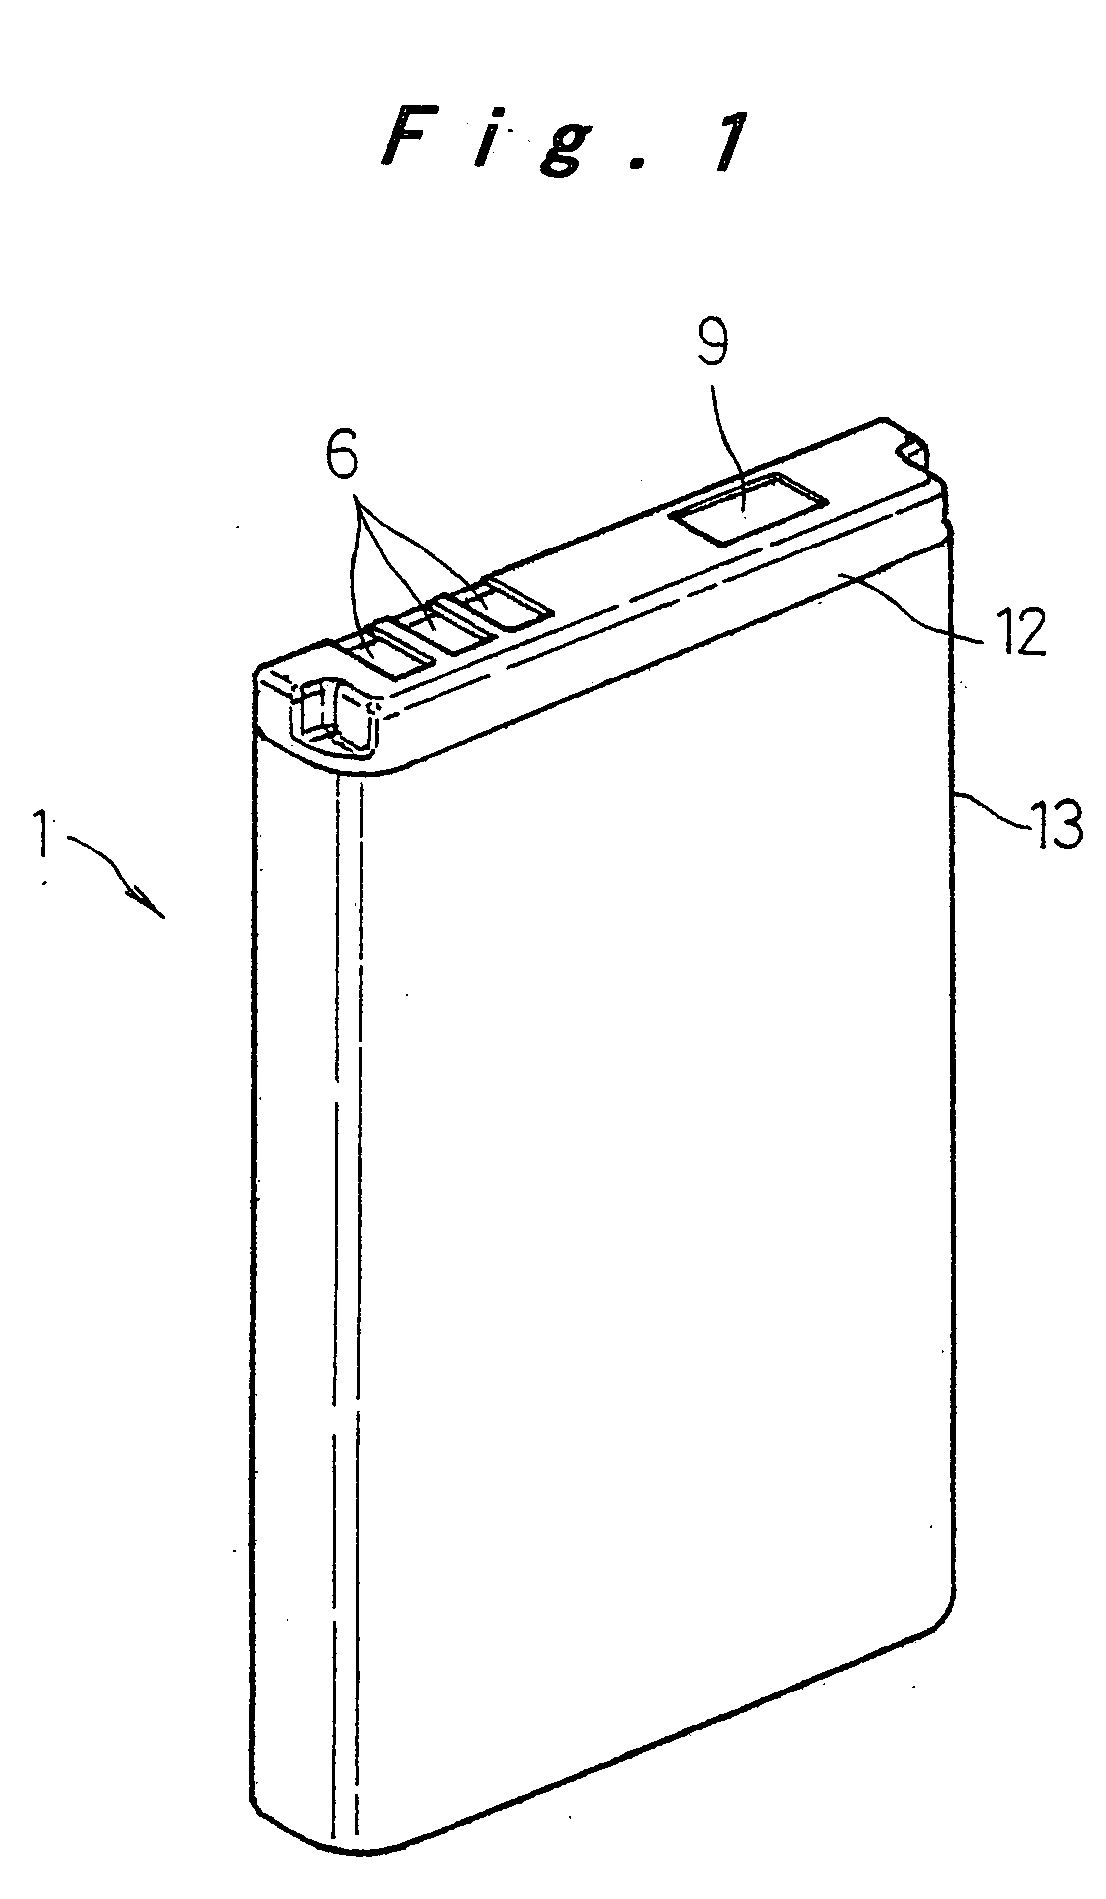 Battery pack manufacturing method